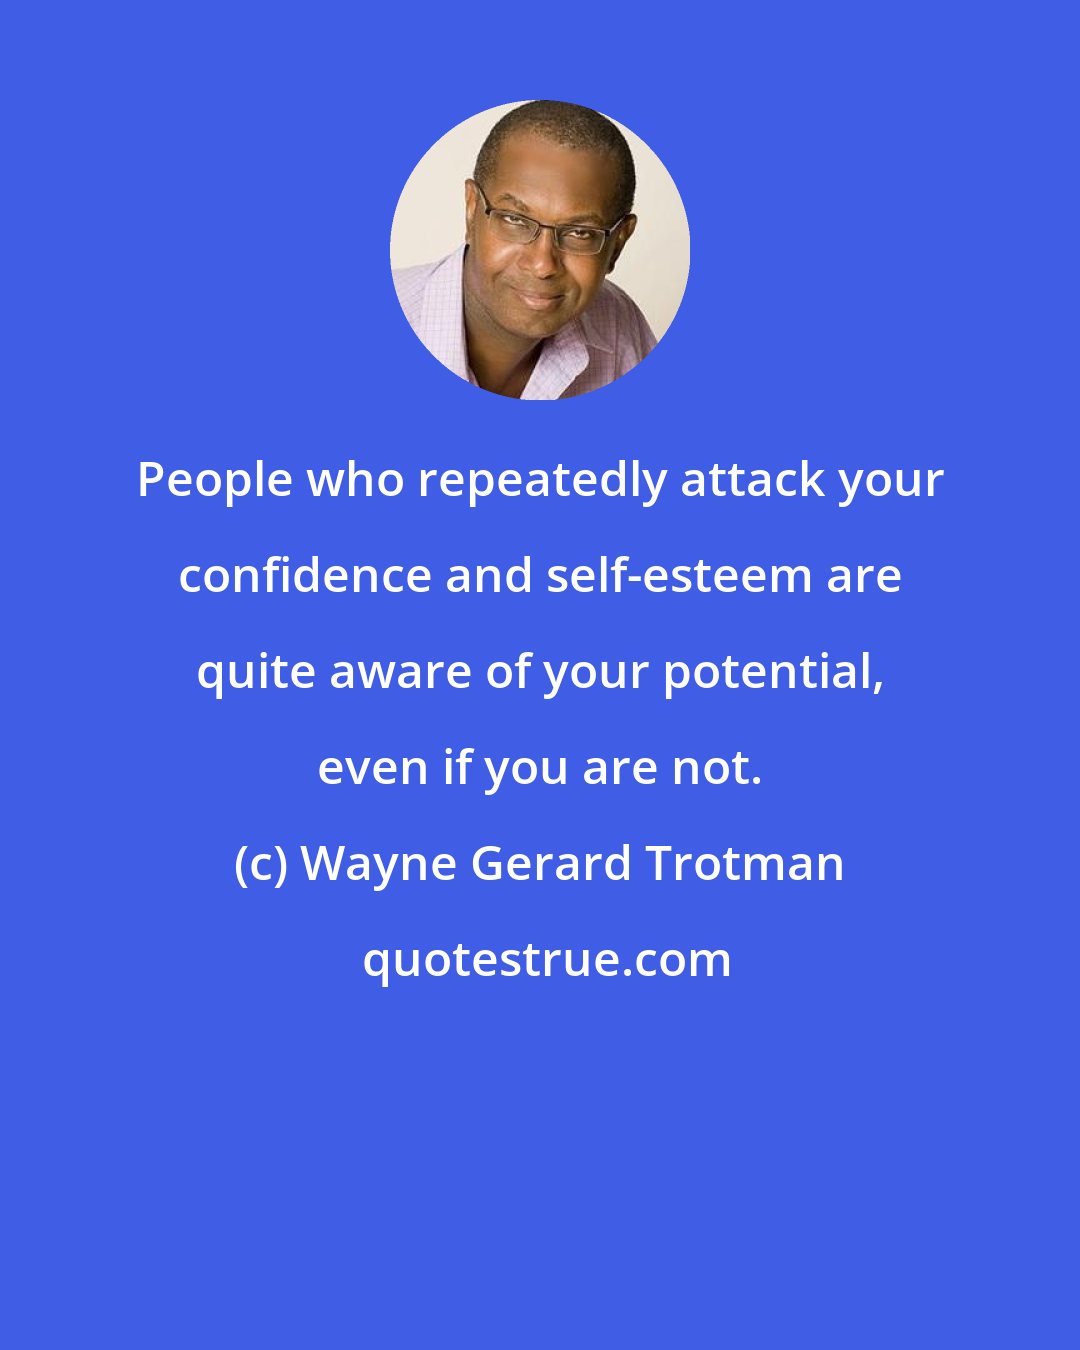 Wayne Gerard Trotman: People who repeatedly attack your confidence and self-esteem are quite aware of your potential, even if you are not.